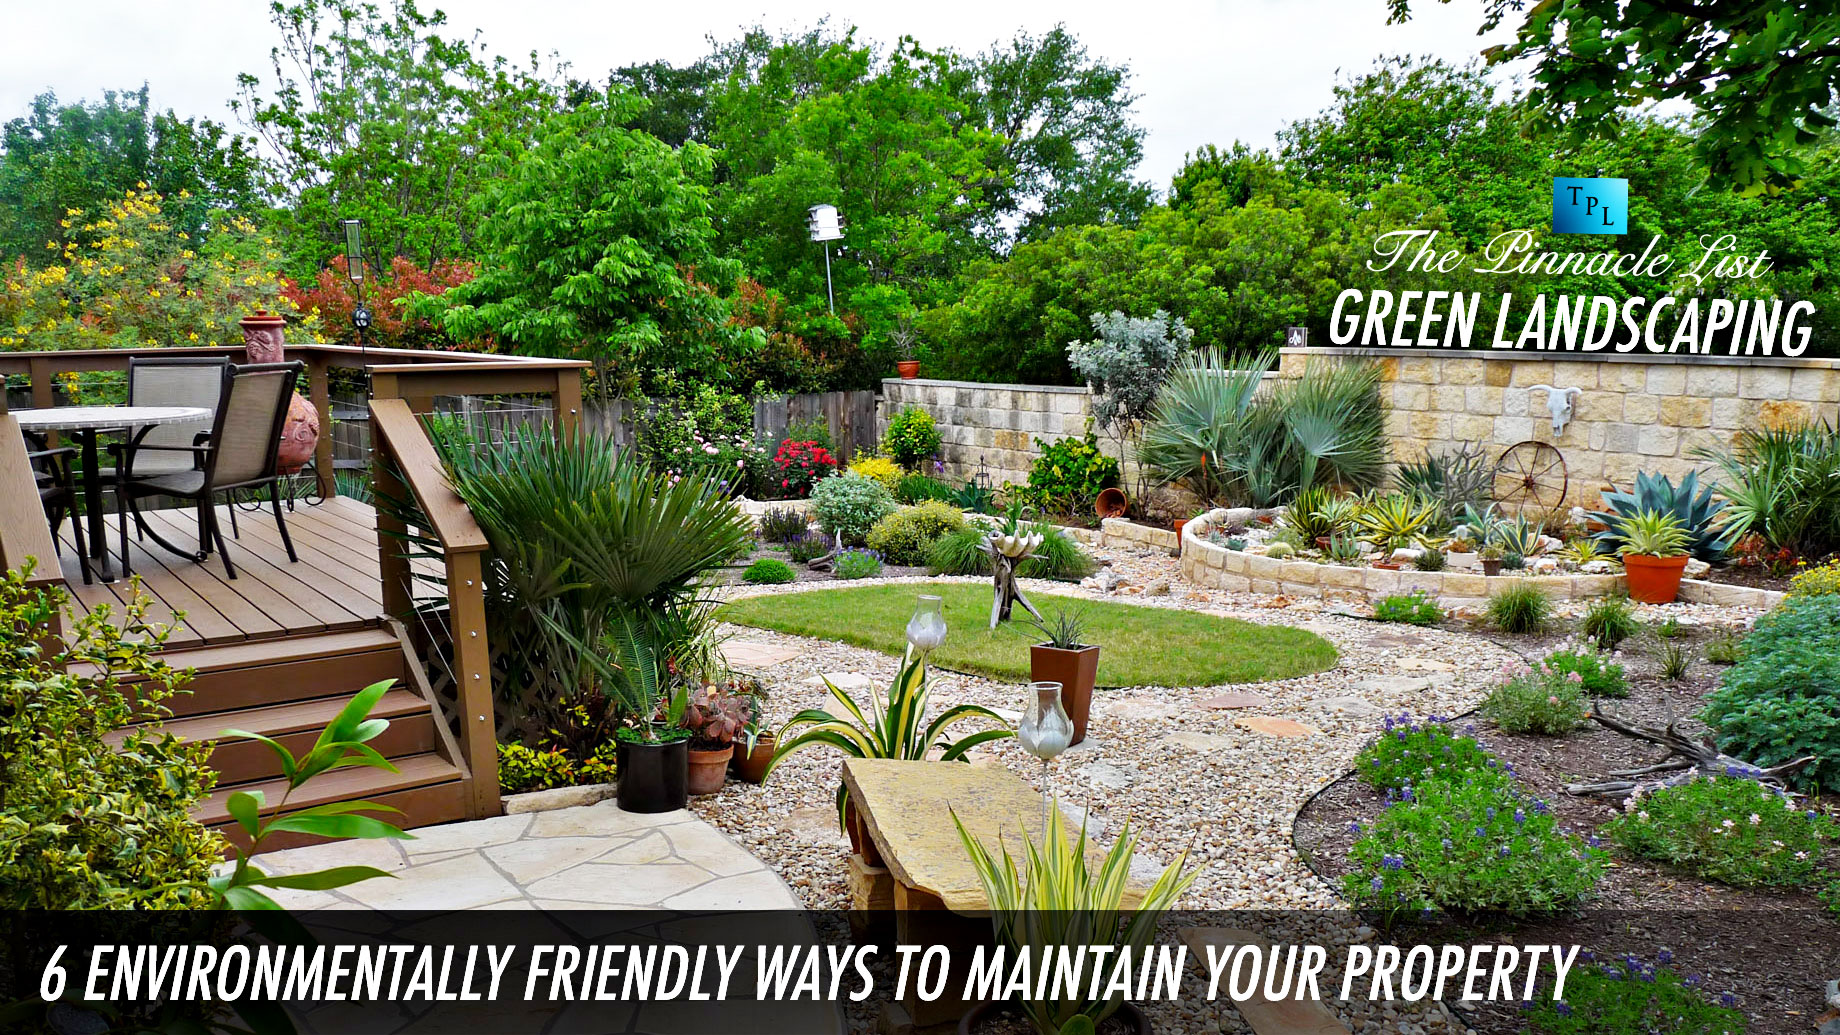 Green Landscaping - 6 Environmentally Friendly Ways to Maintain Your Property